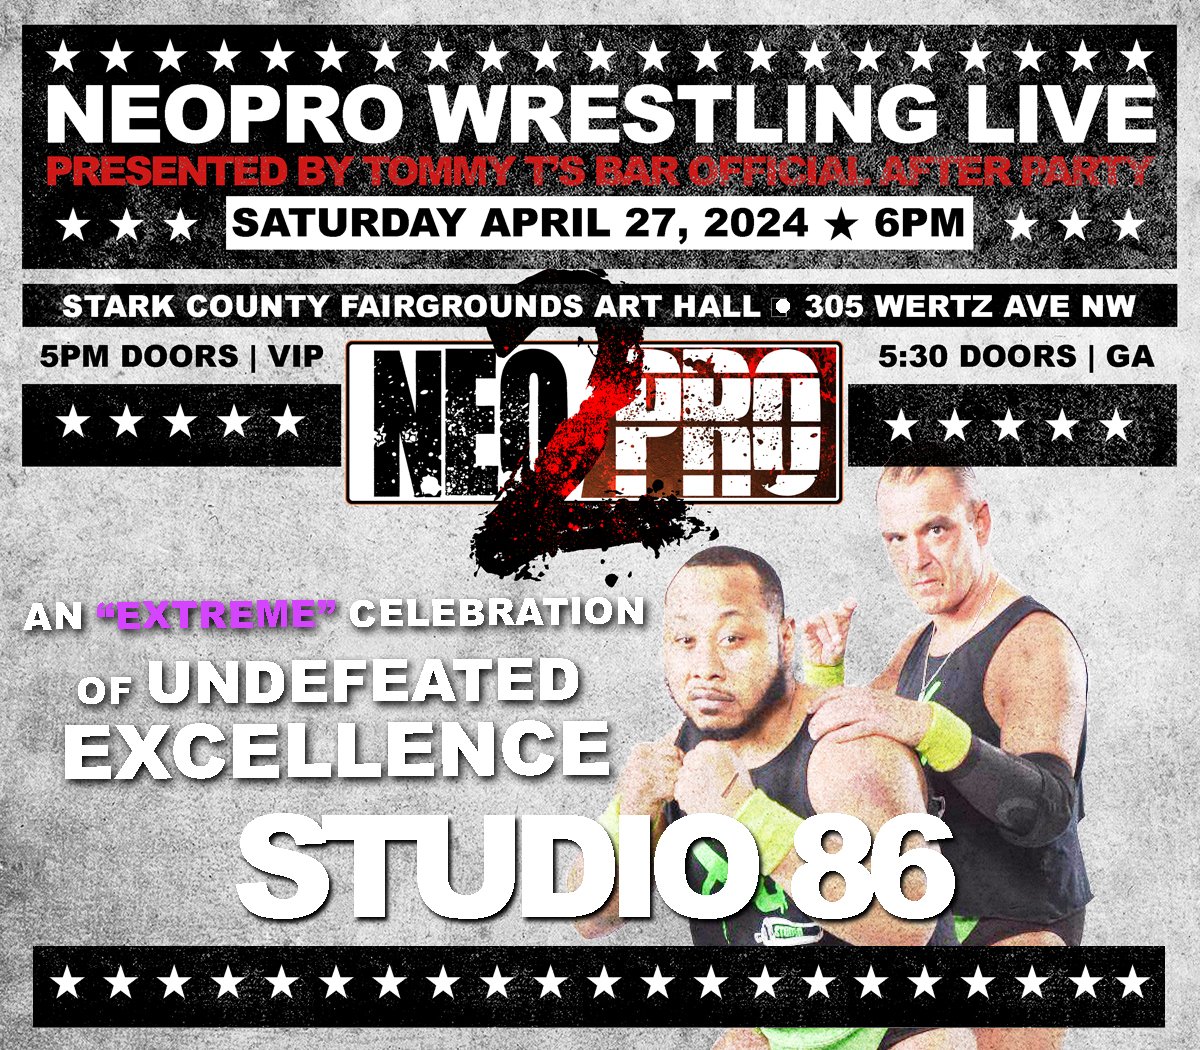 ‼️BREAKING NEWS‼️ General admission tickets are still available at NEOPROTIX.com and at Marco's Pizza located at 1134 30th St NW in Canton!